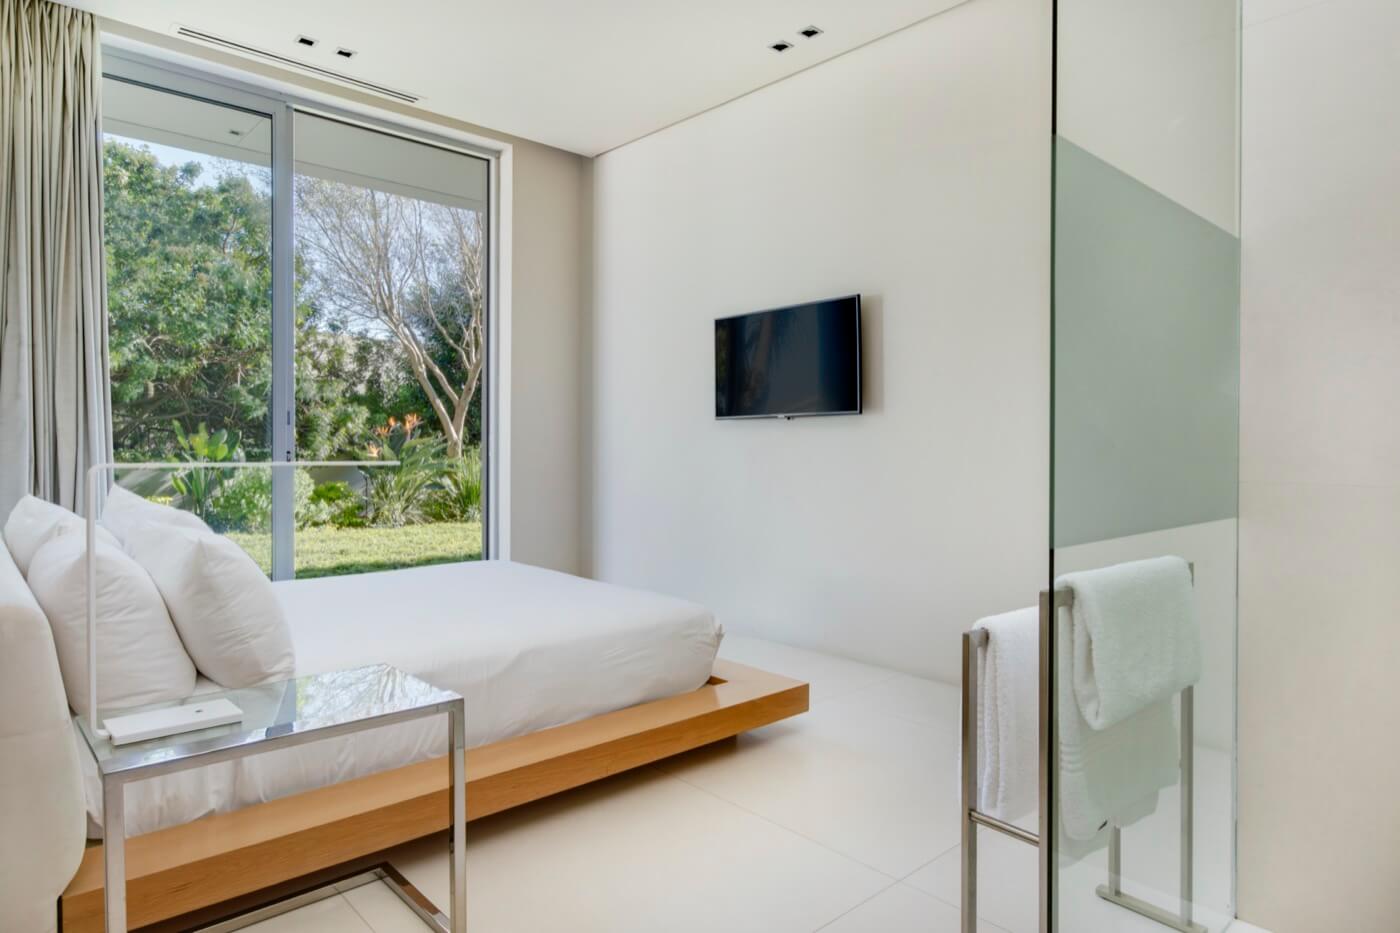 Photo 33 of The Crescent accommodation in Camps Bay, Cape Town with 6 bedrooms and 6.5 bathrooms